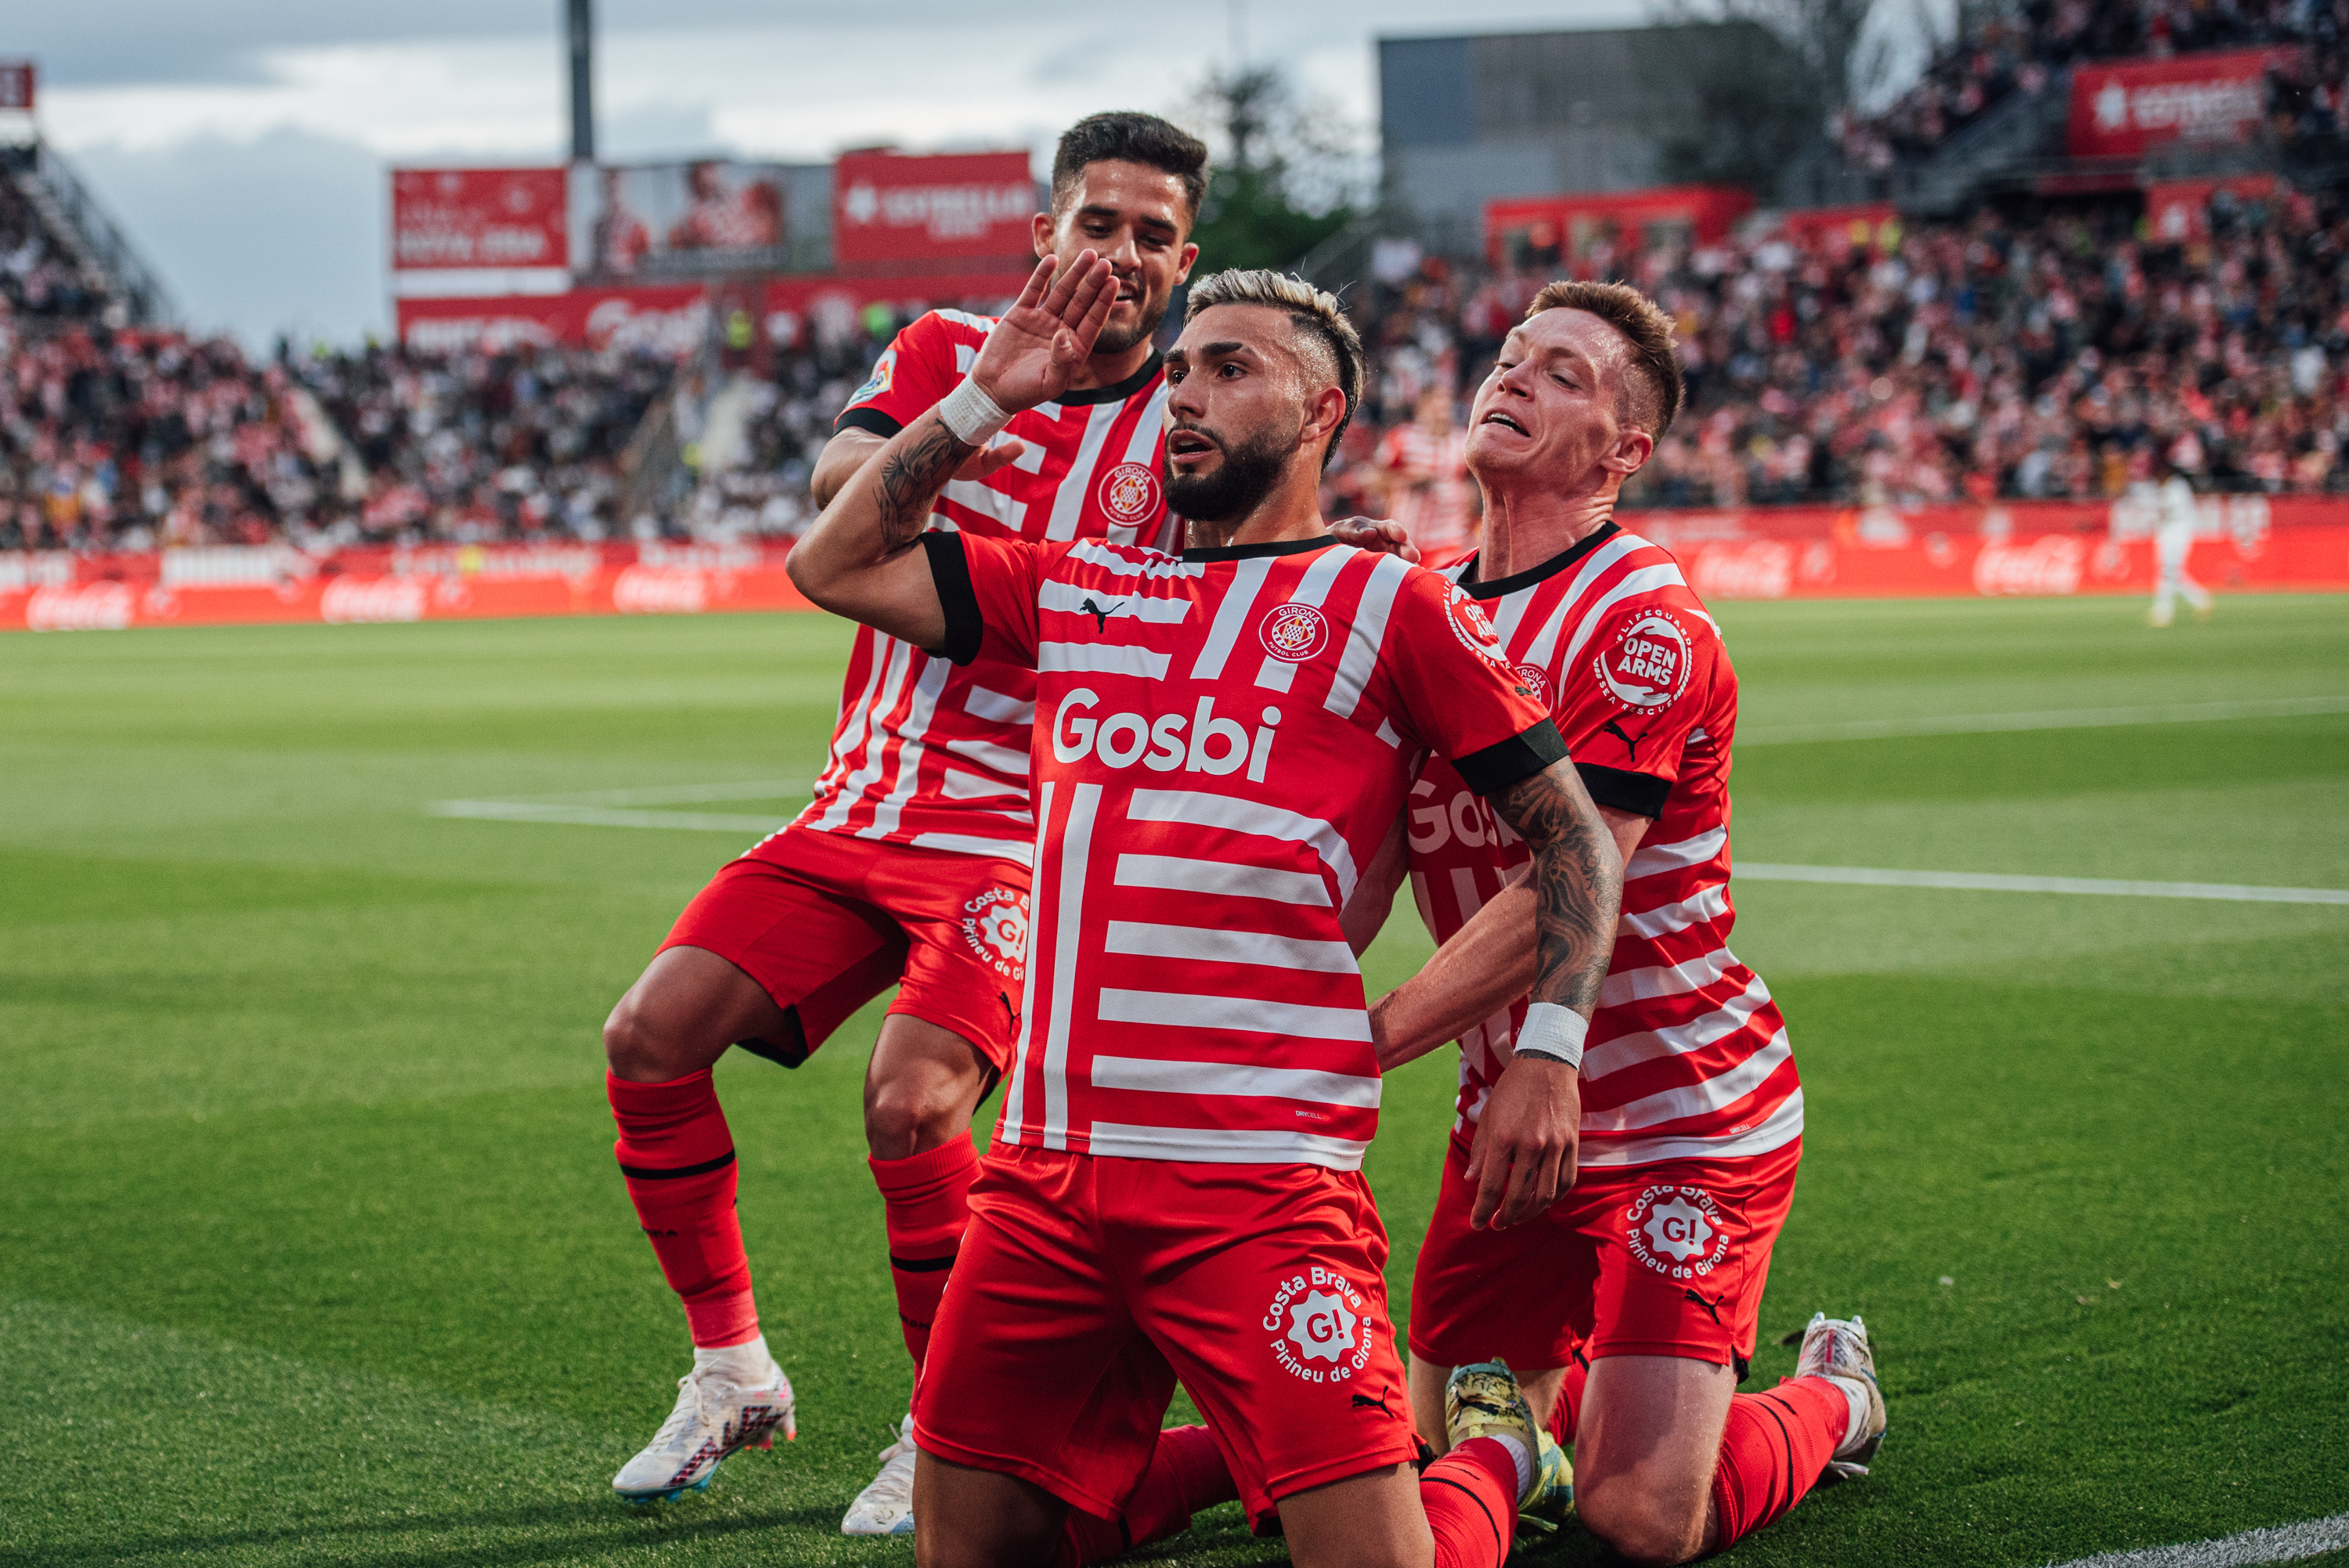 A record-breaking victory, Girona FC